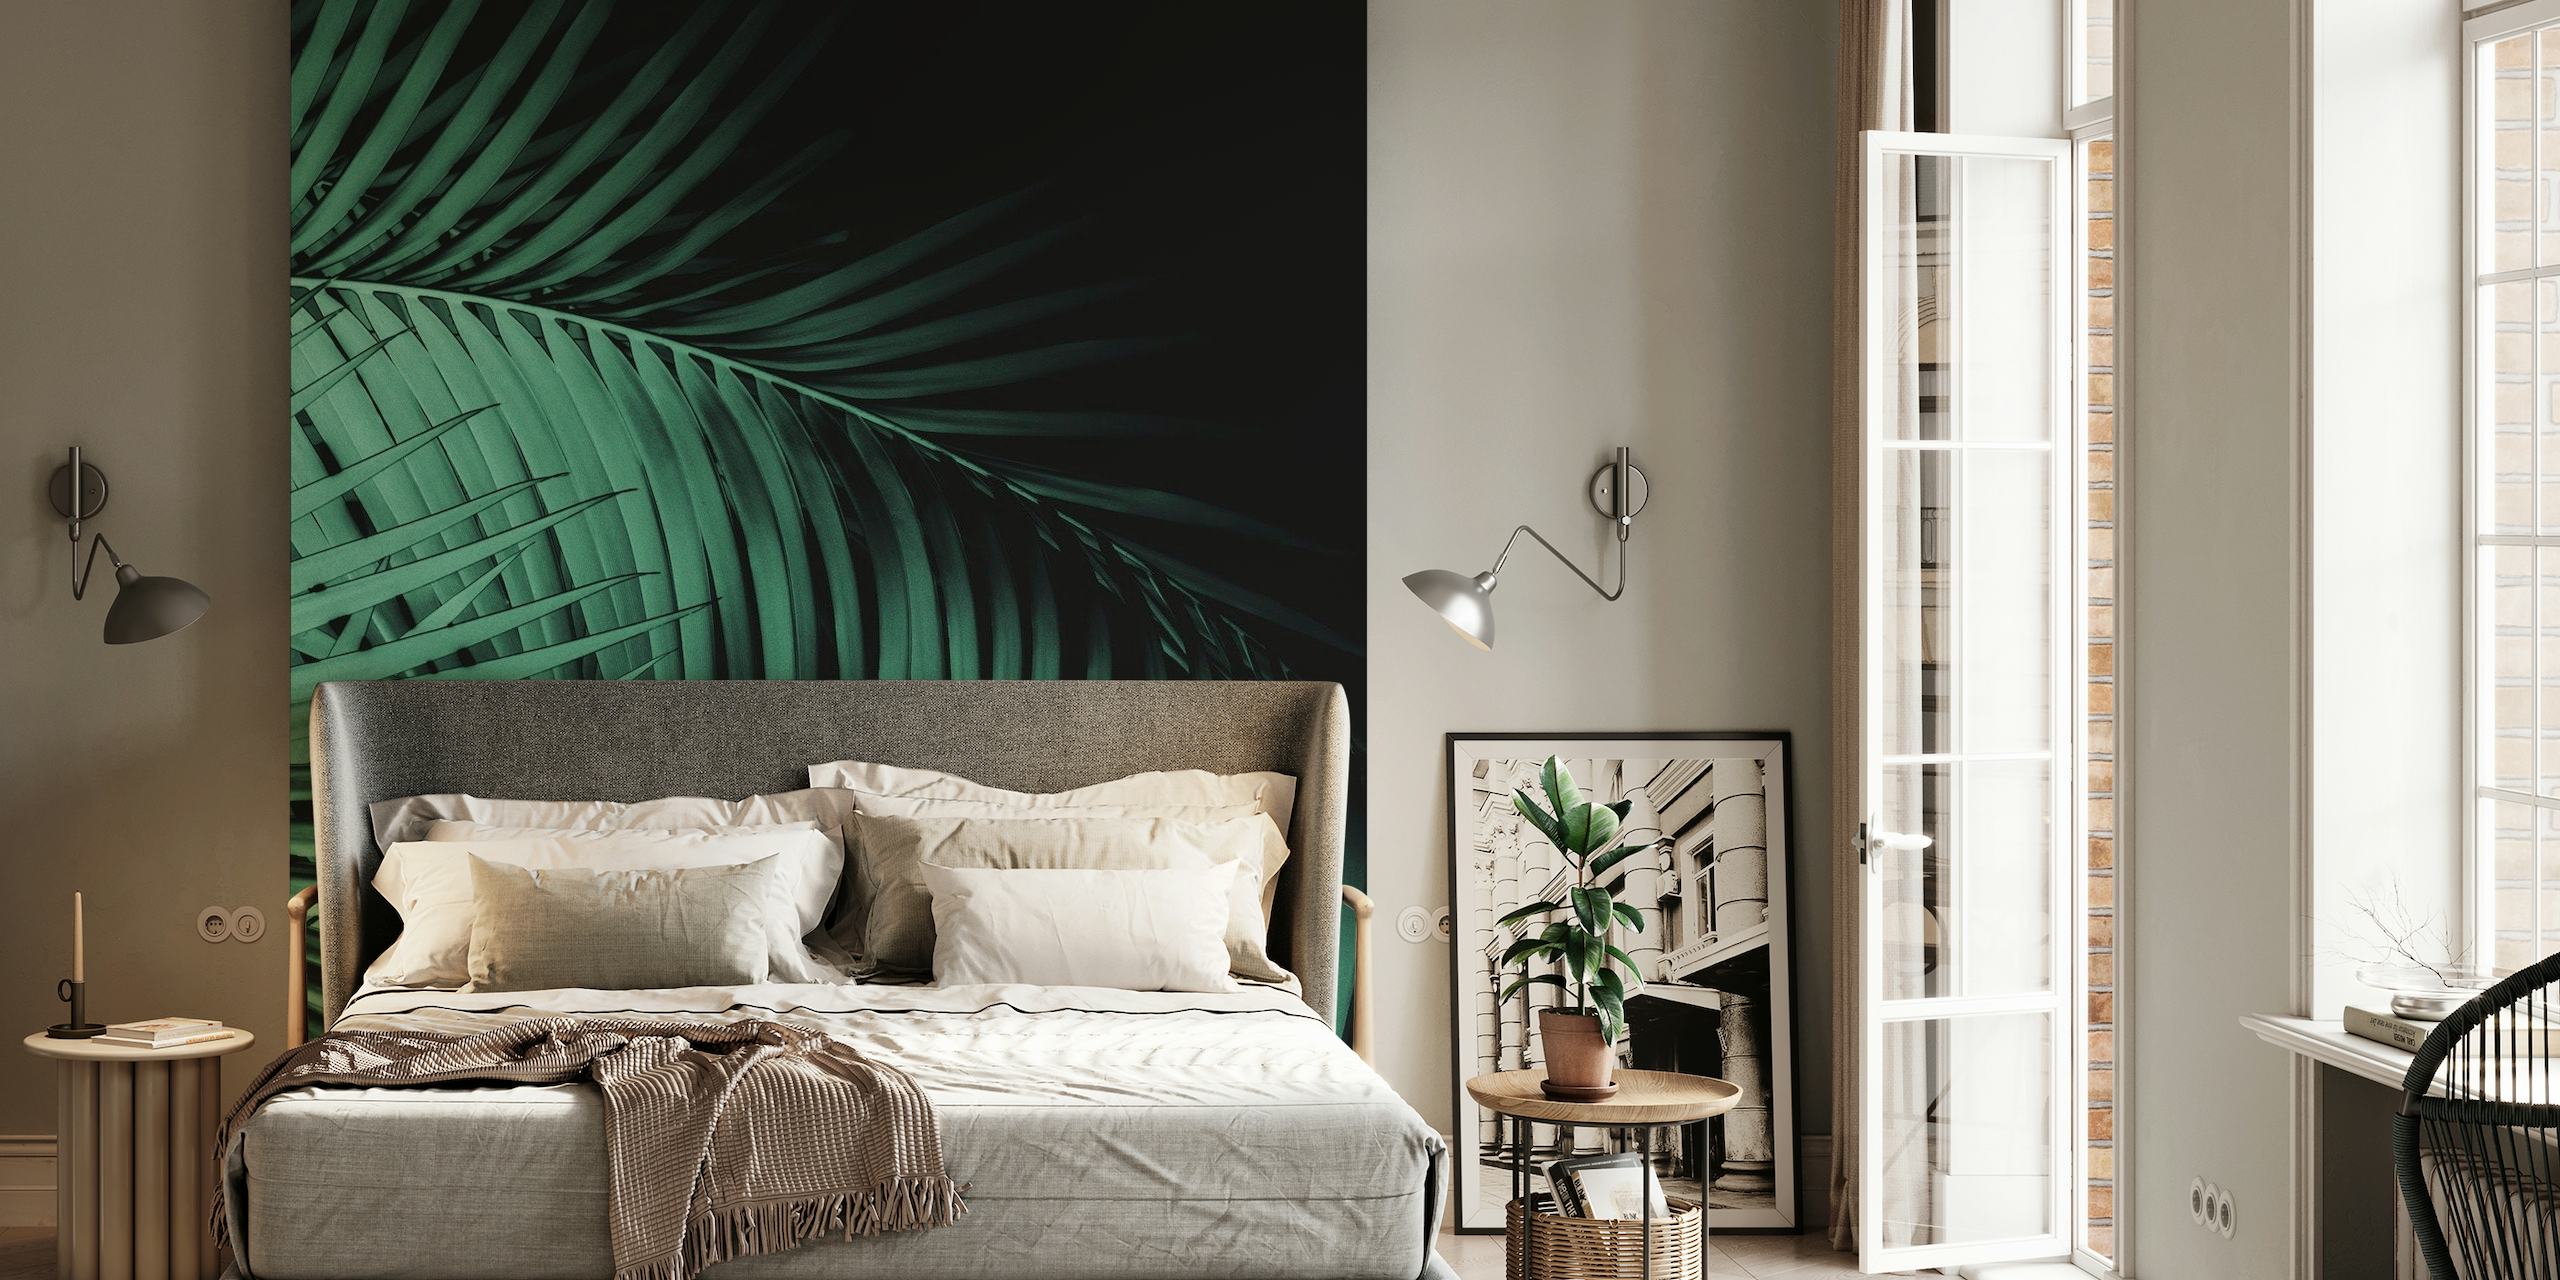 Palm Leaves Green Vibes 7 wall mural with a pattern of dense palm foliage in shades of green